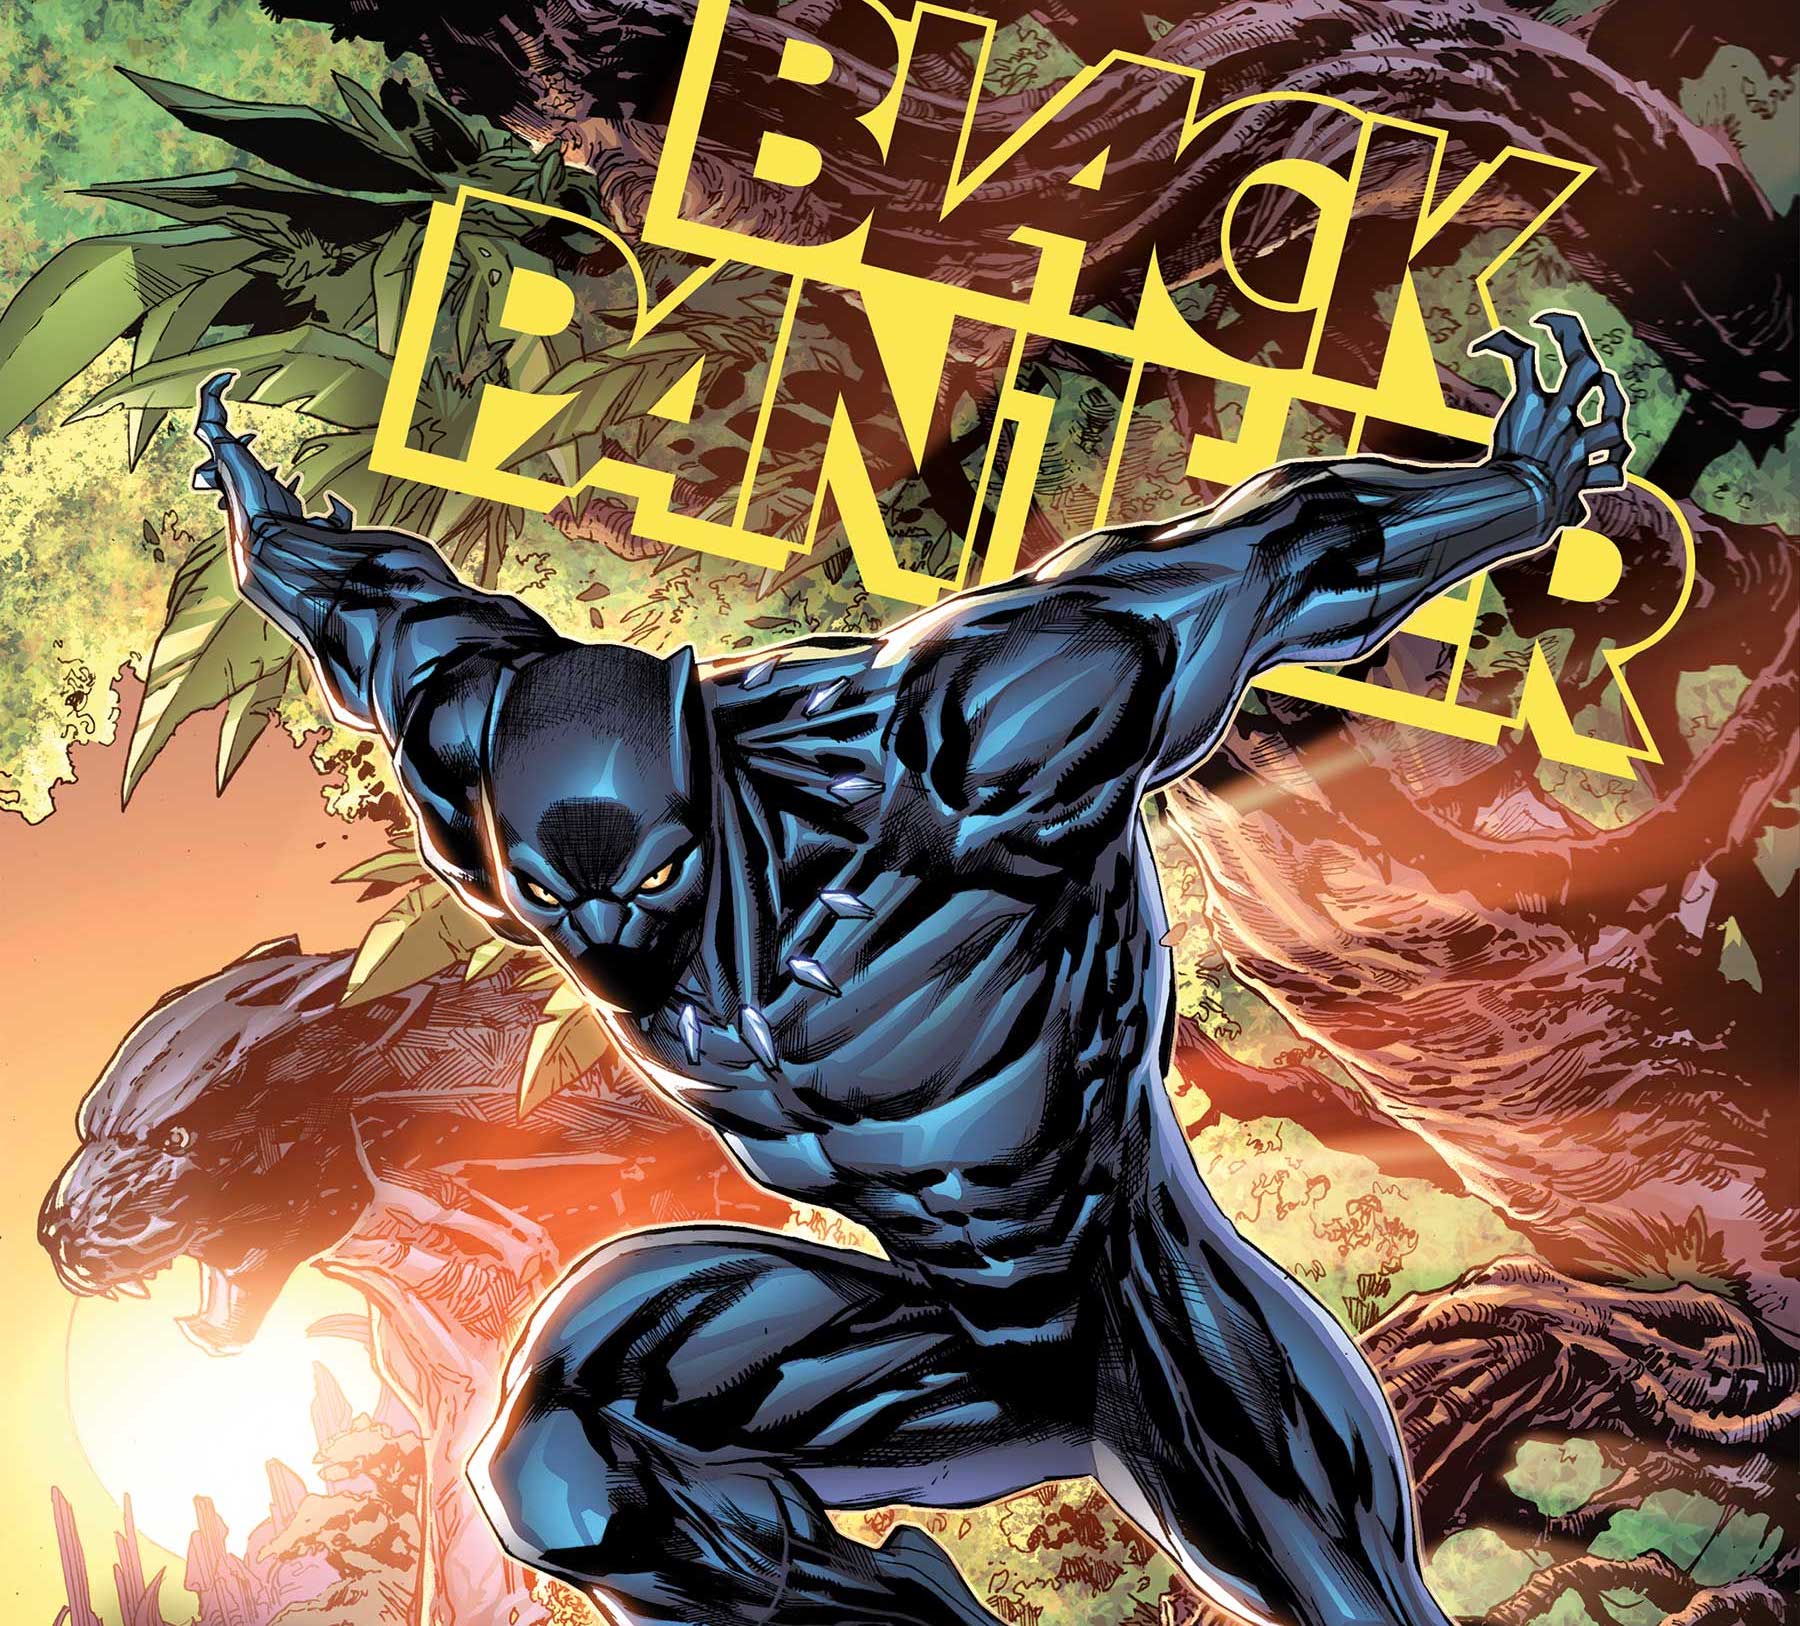 Marvel announces 'Black Panther: Unconquered' #1 one-shot